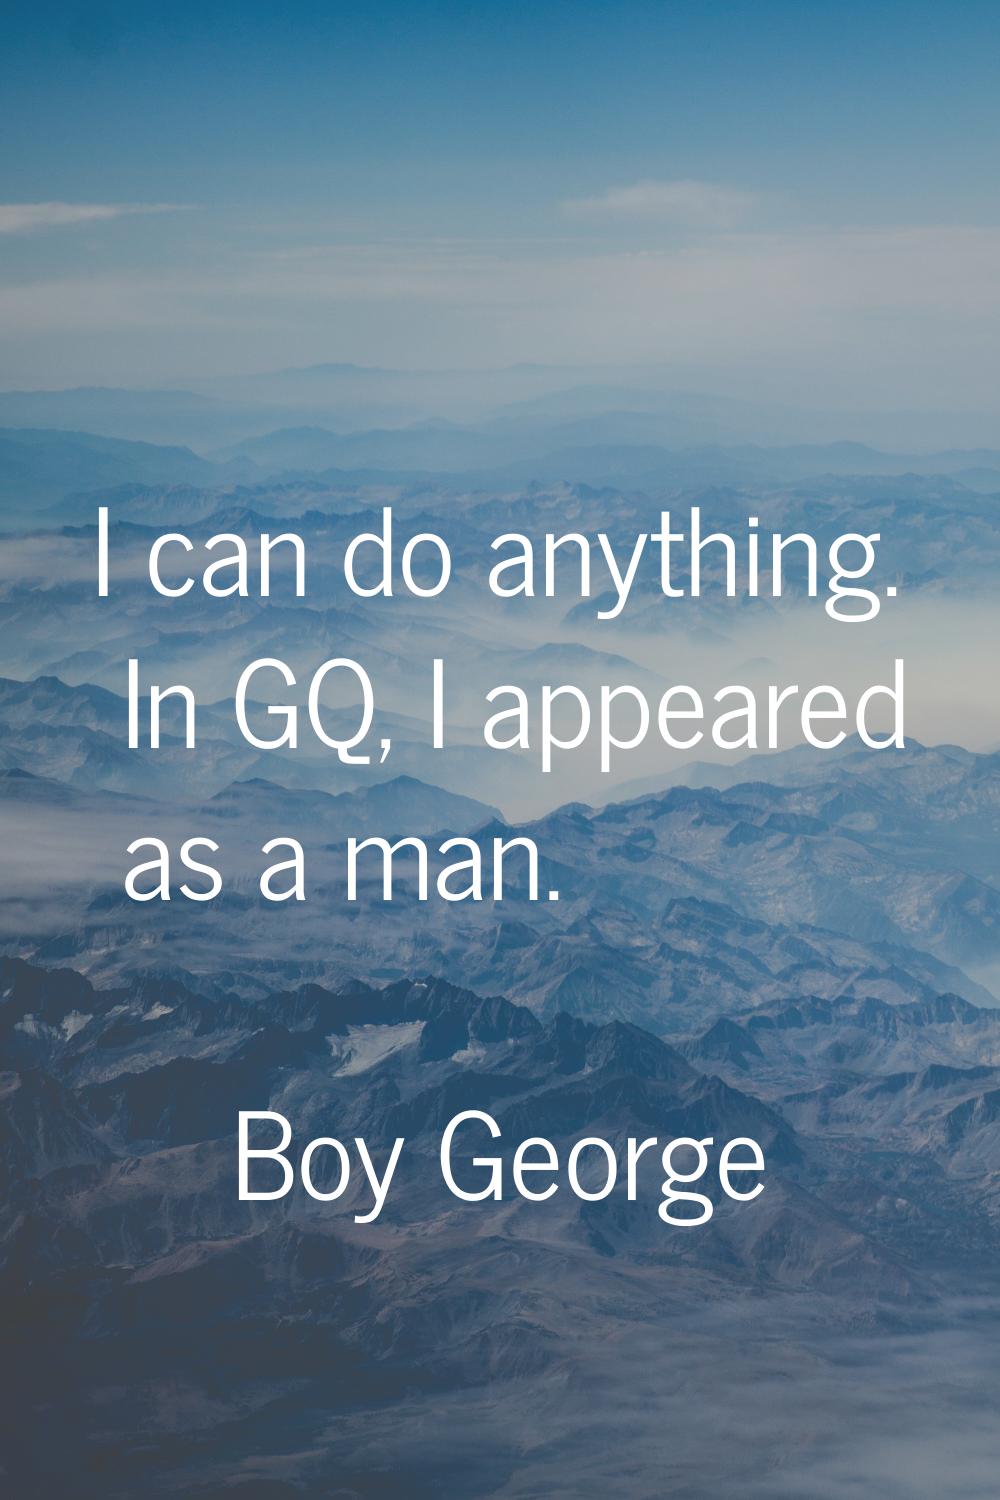 I can do anything. In GQ, I appeared as a man.